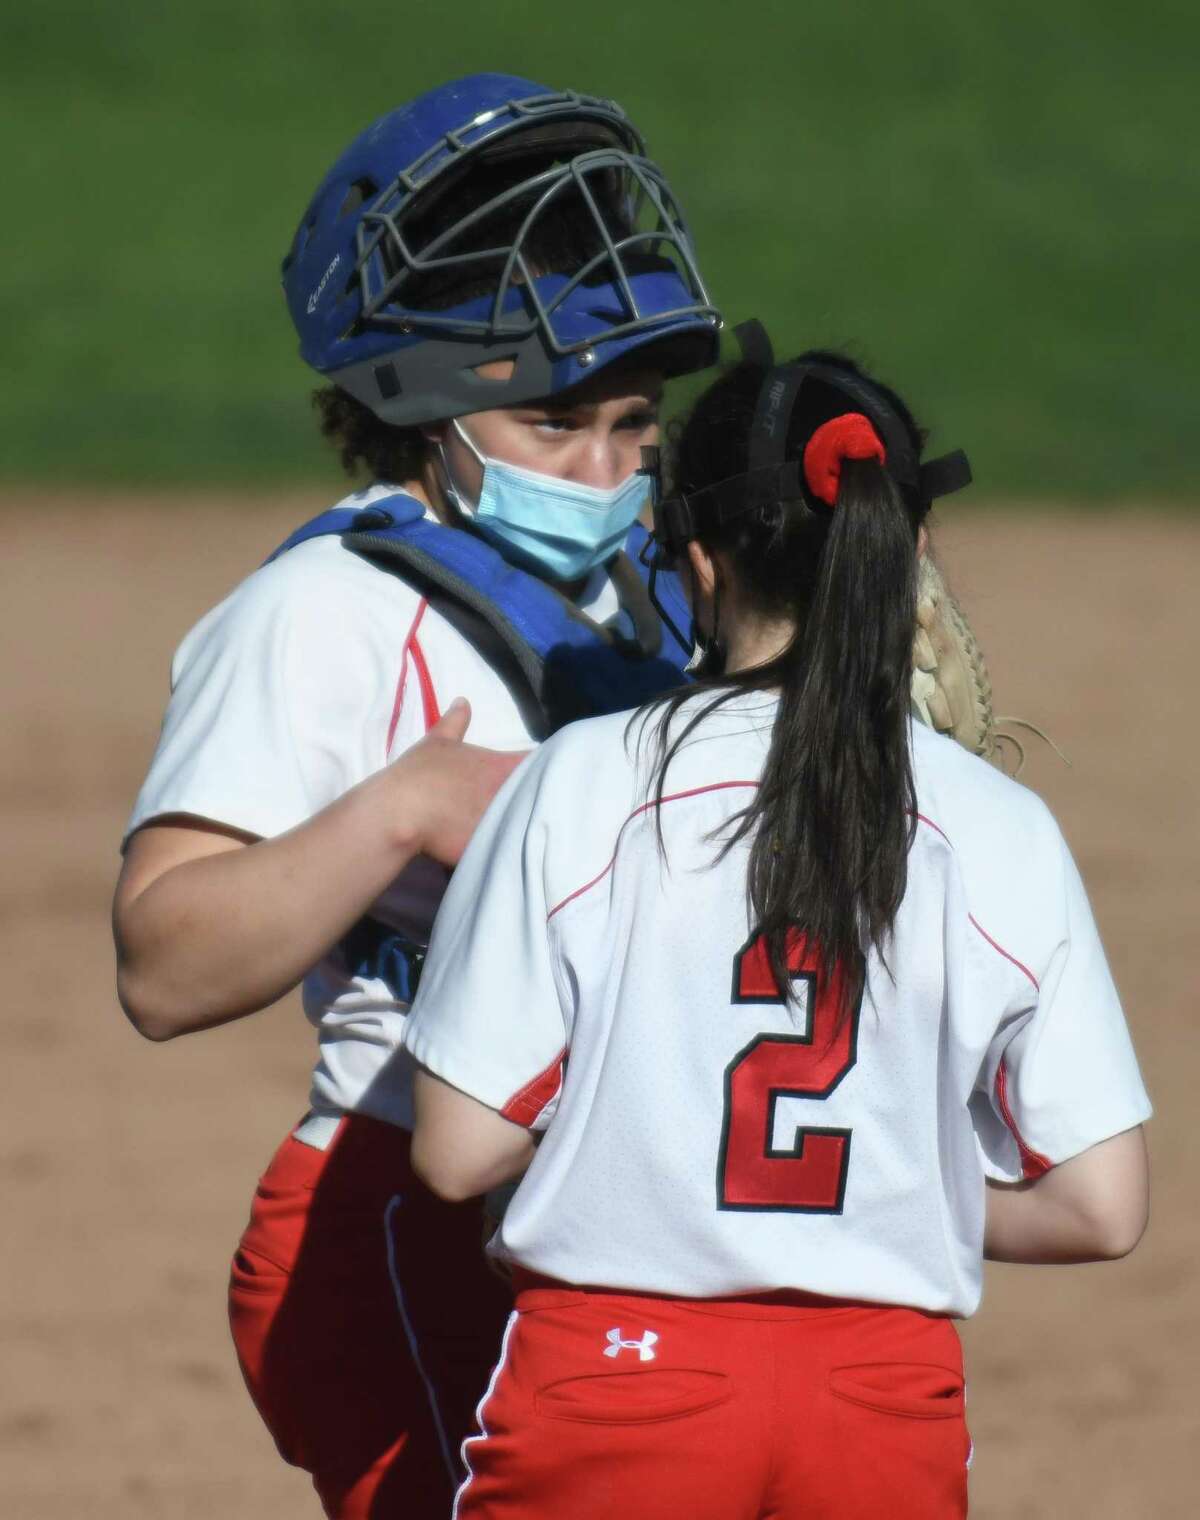 Photos from the high school softball game between Greenwich High School and Stamford High School at Stamford High School in Stamford, Conn. Tuesday, April 13, 2021.